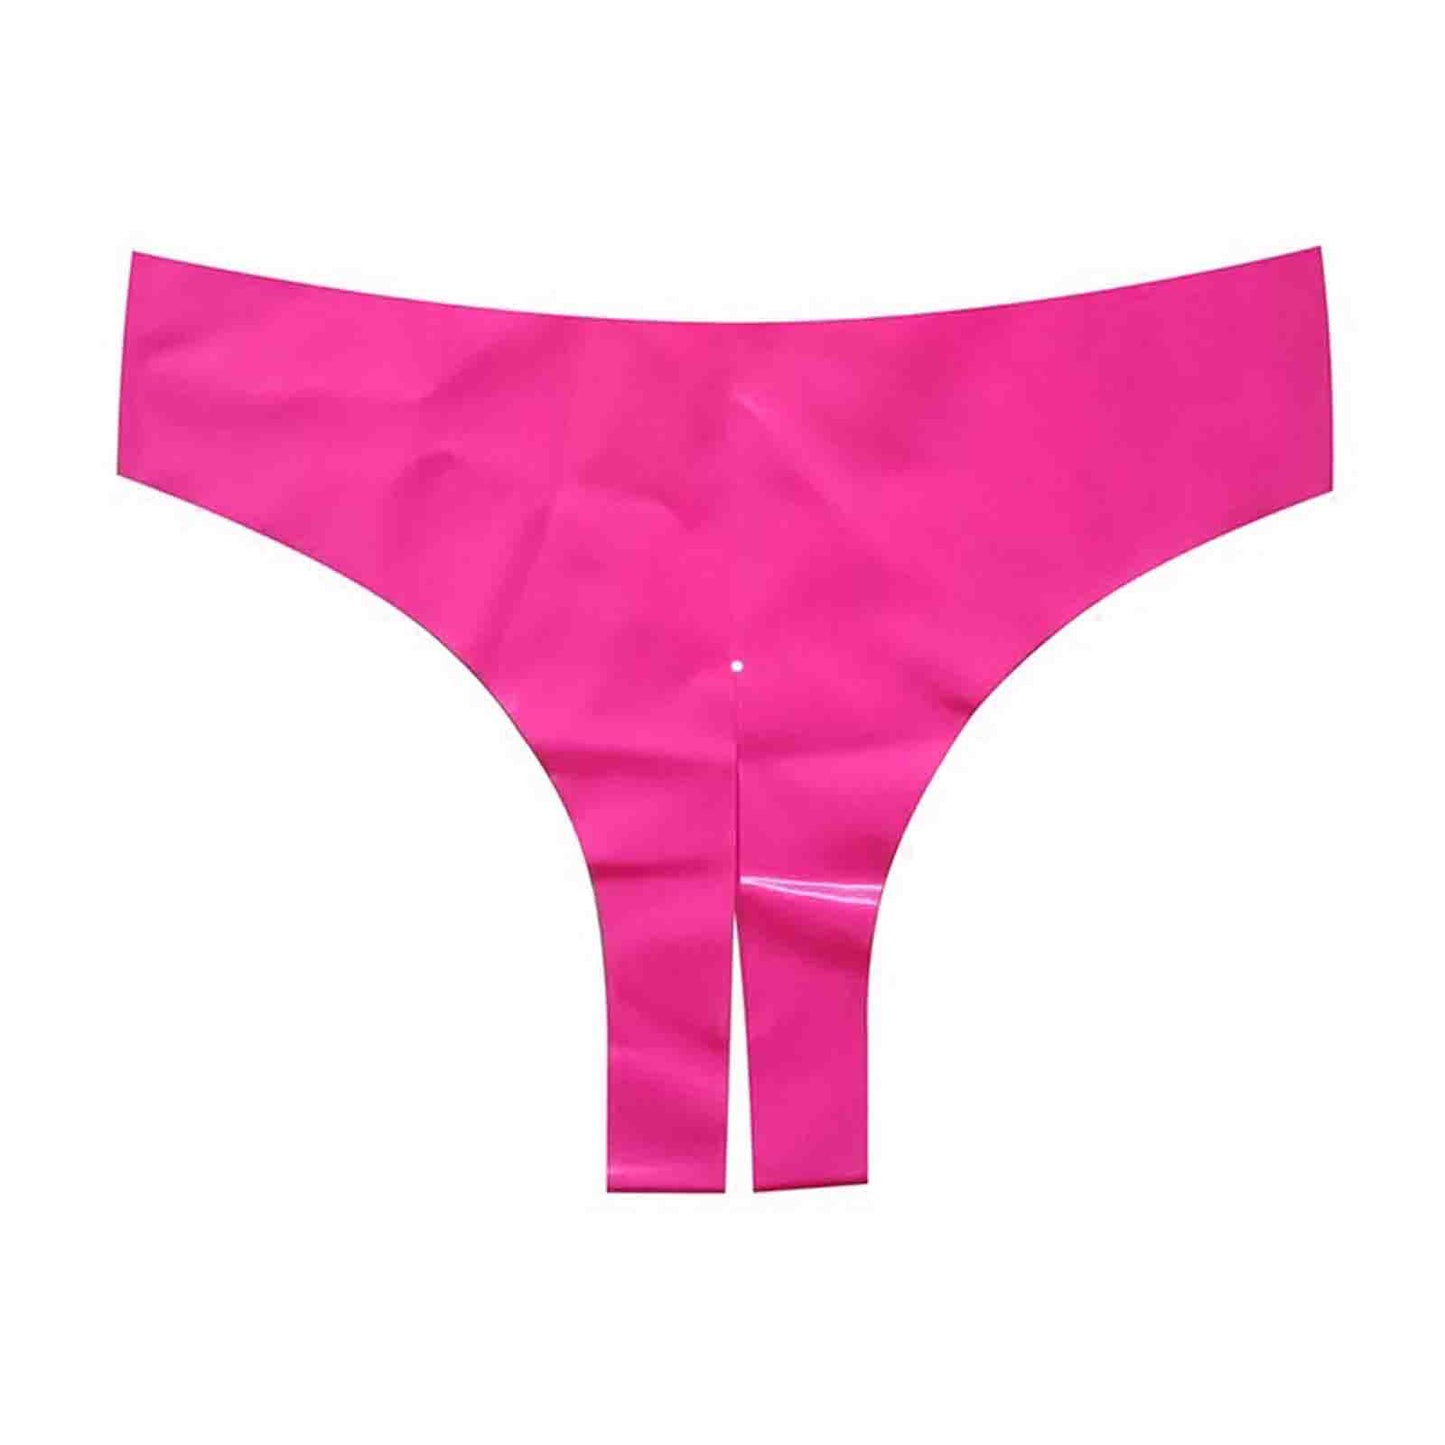 MONNIK Latex hot Underwear Women Crotchless Panties Sexy Briefs open crotch shorts for fetish Catsuit Club wear